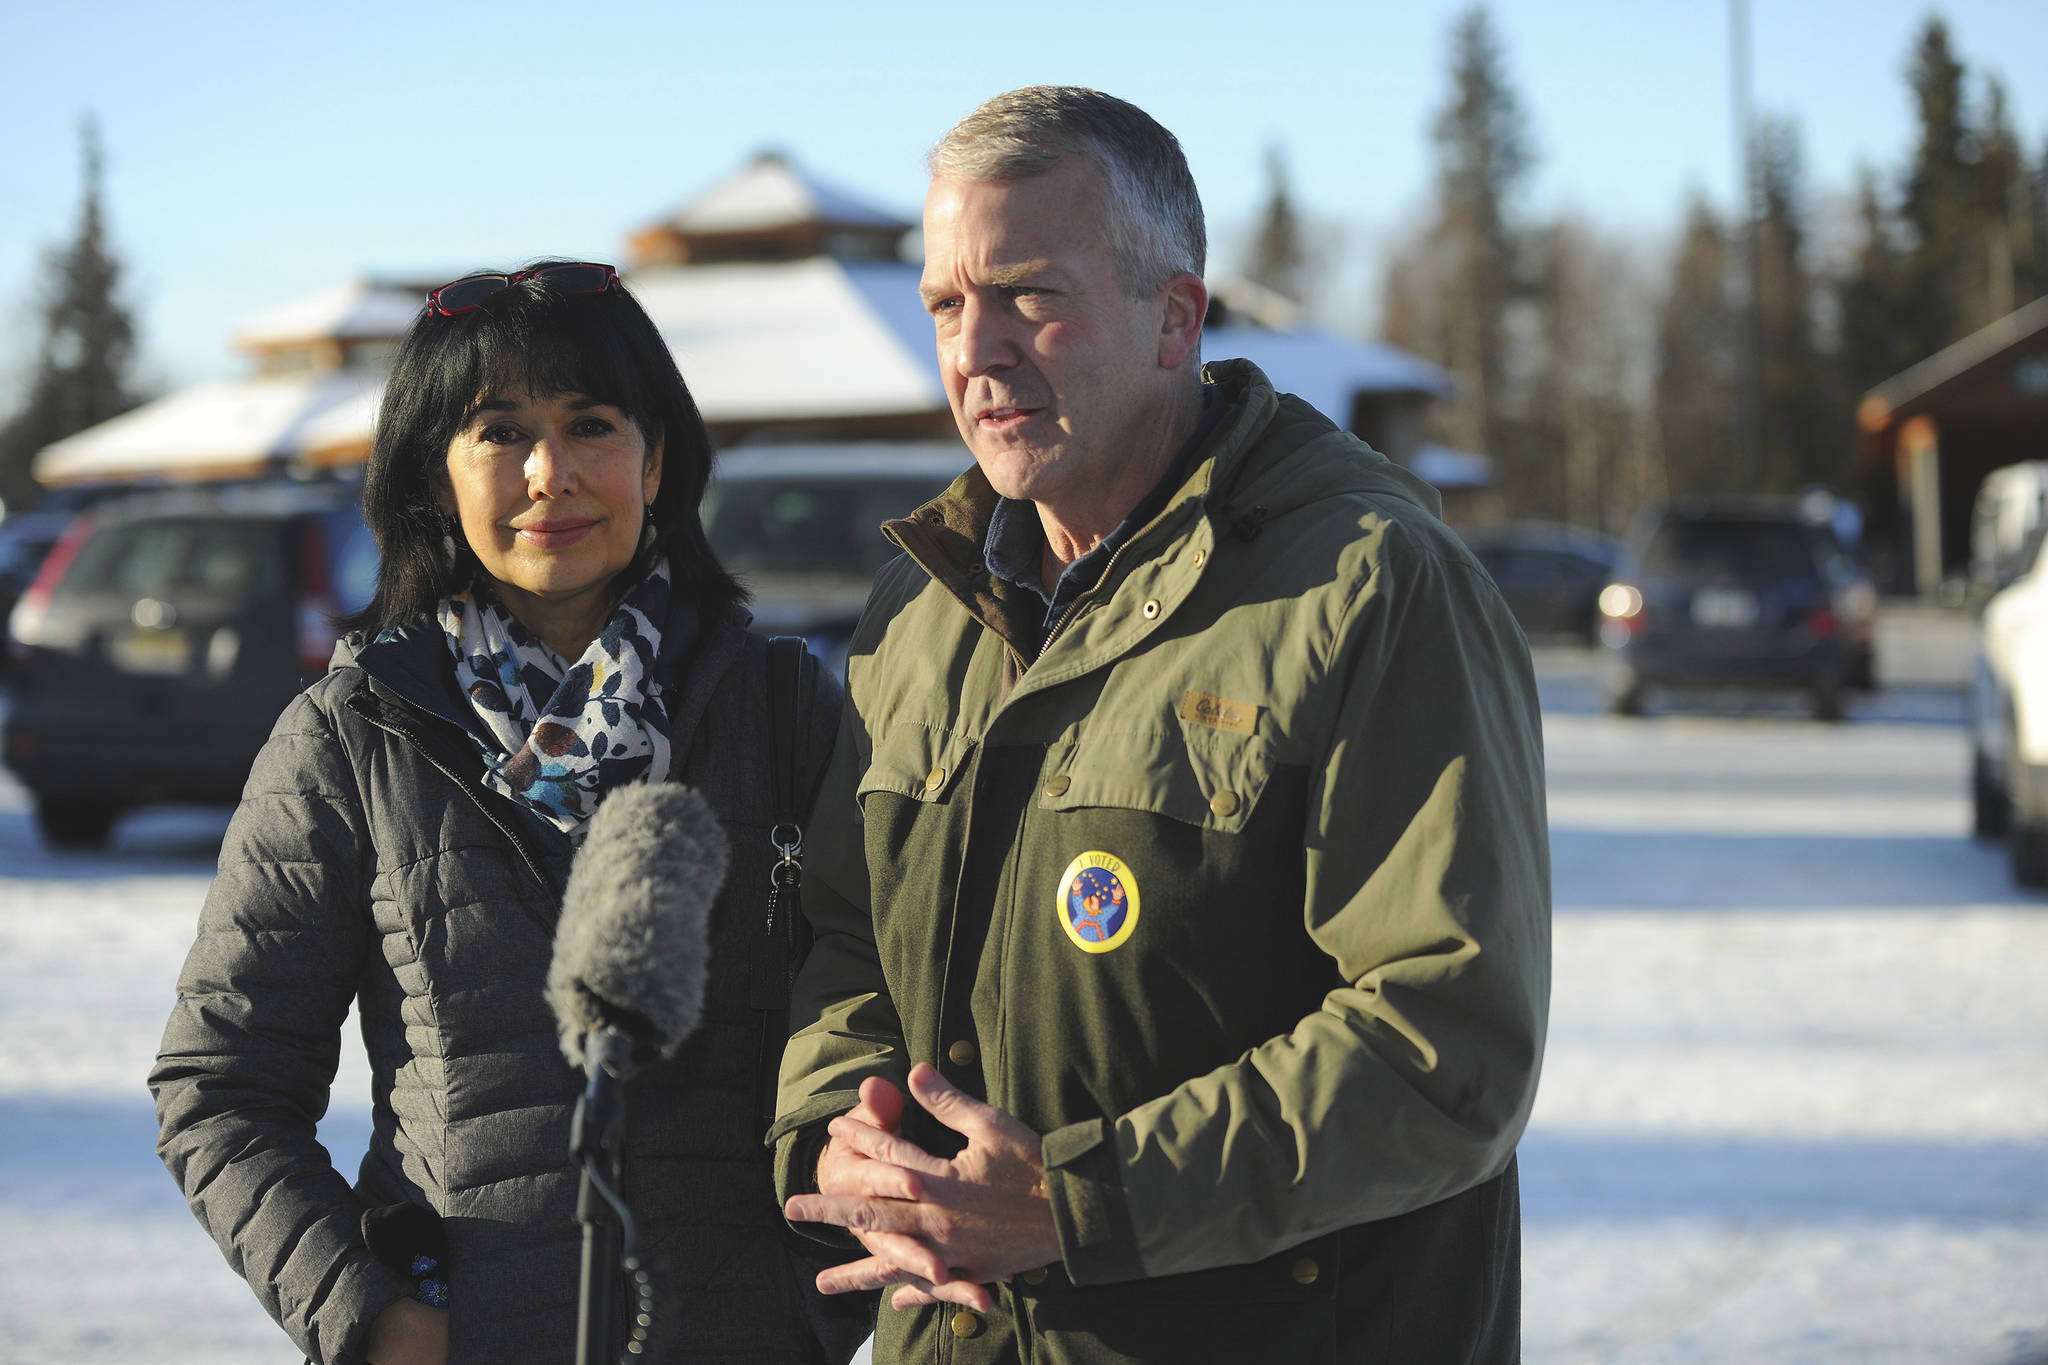 Incumbent Republican Sen. Dan Sullivan, left, with his wife Julie, speaks to the media after casting his ballot at the Alaska Zoo Tuesday, Nov. 3, 2020 in Anchorage, Alaska. (AP Photo / Michael Dinneen)